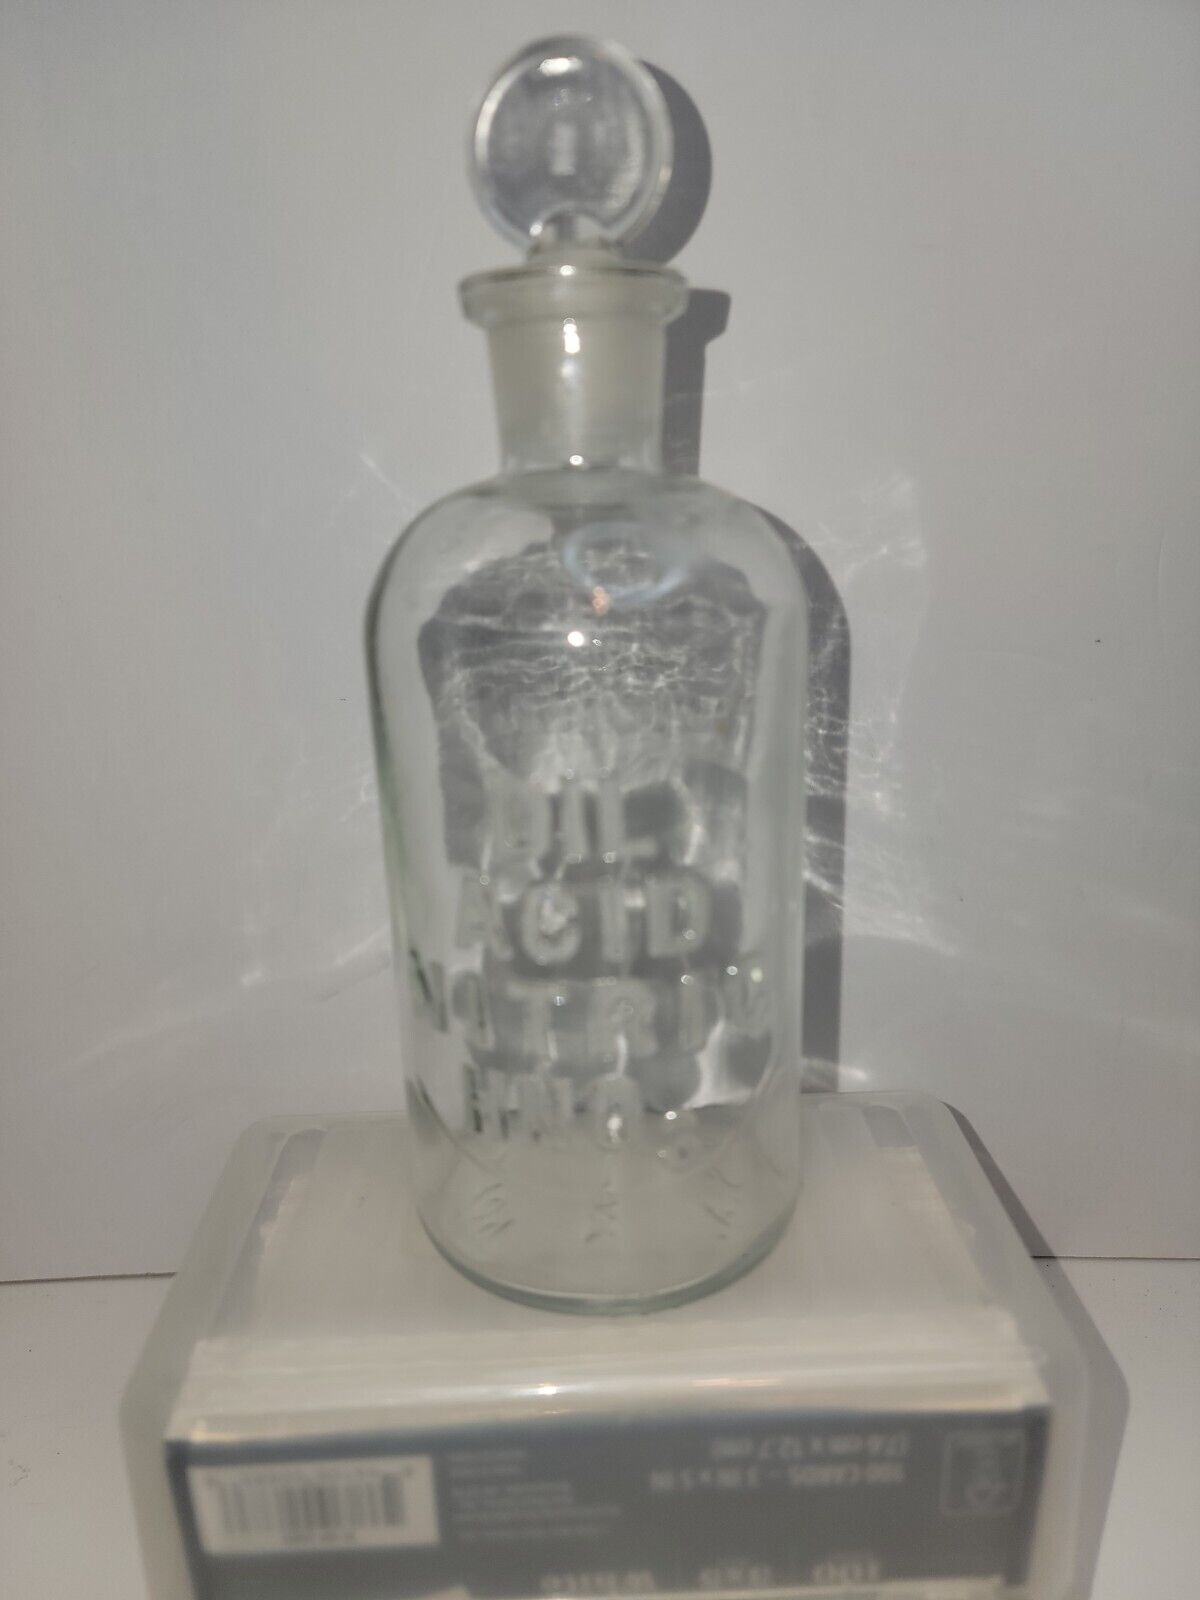 DIL ACID NITRIC HNO3 Antique Embossed Glass Acid Poison Bottle Apothecary (262)